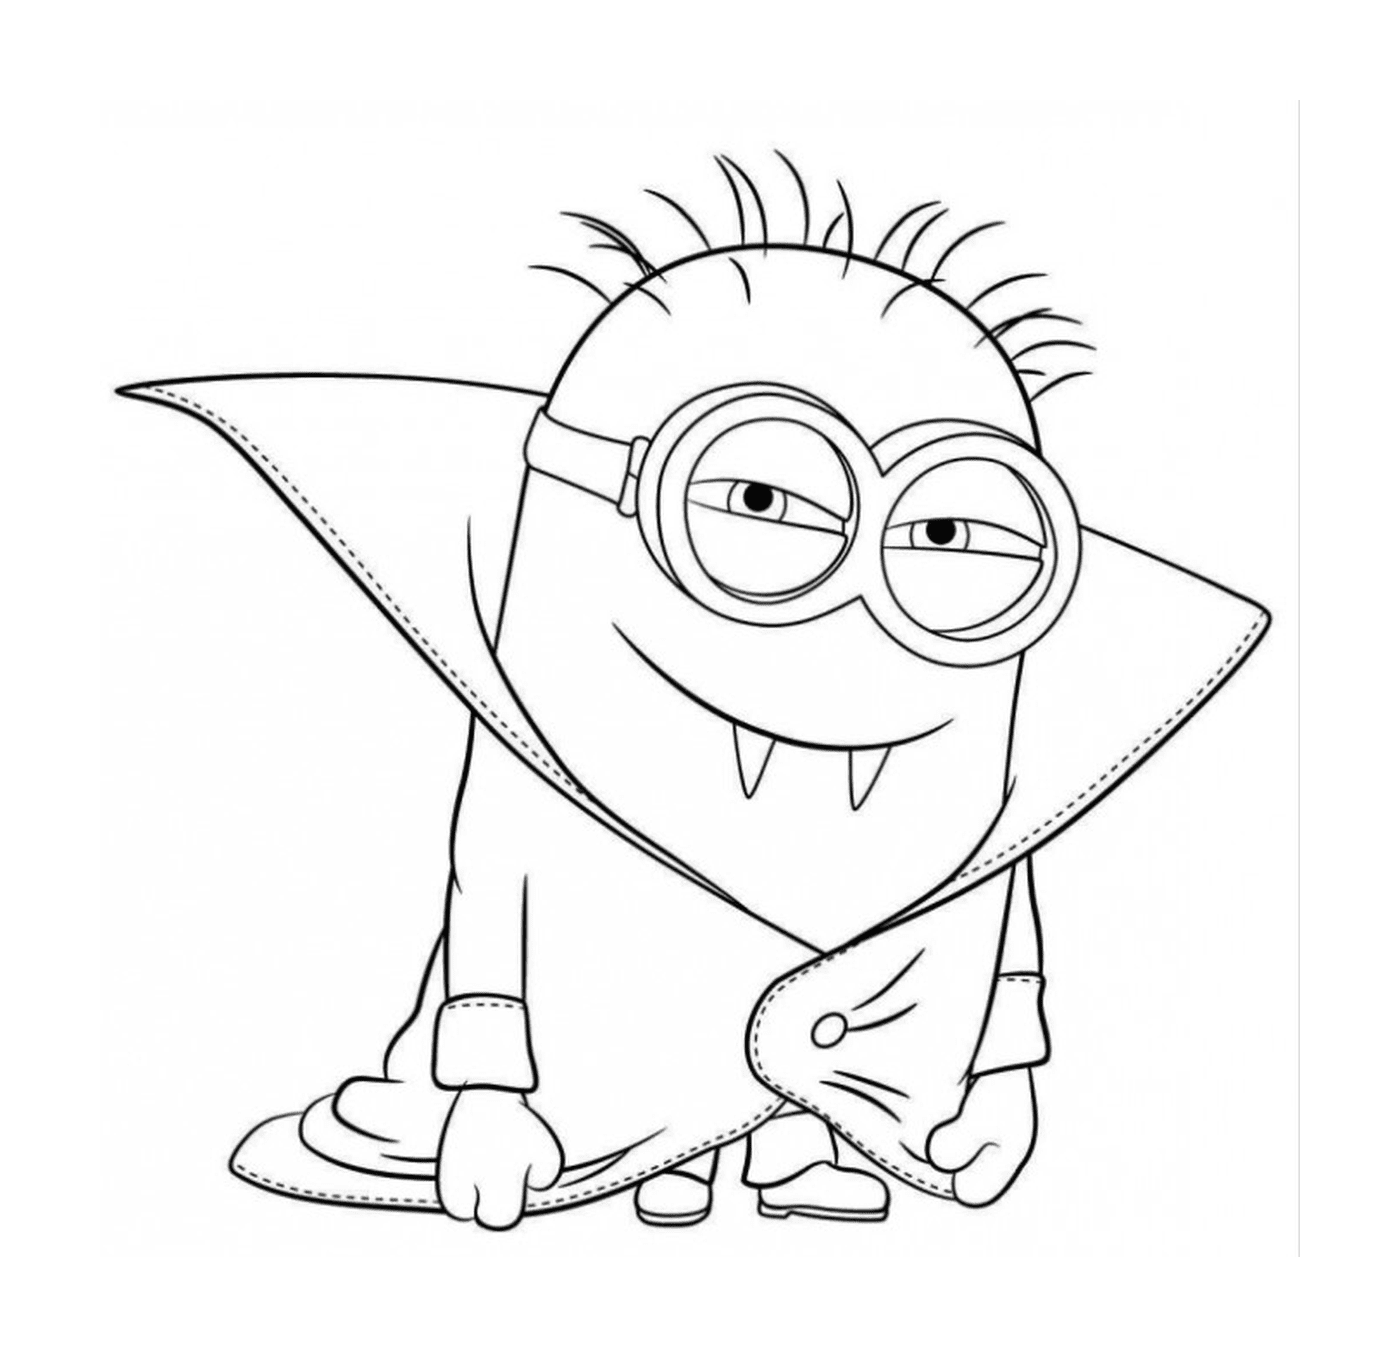  Vampire minion for Halloween, glasses on the nose 